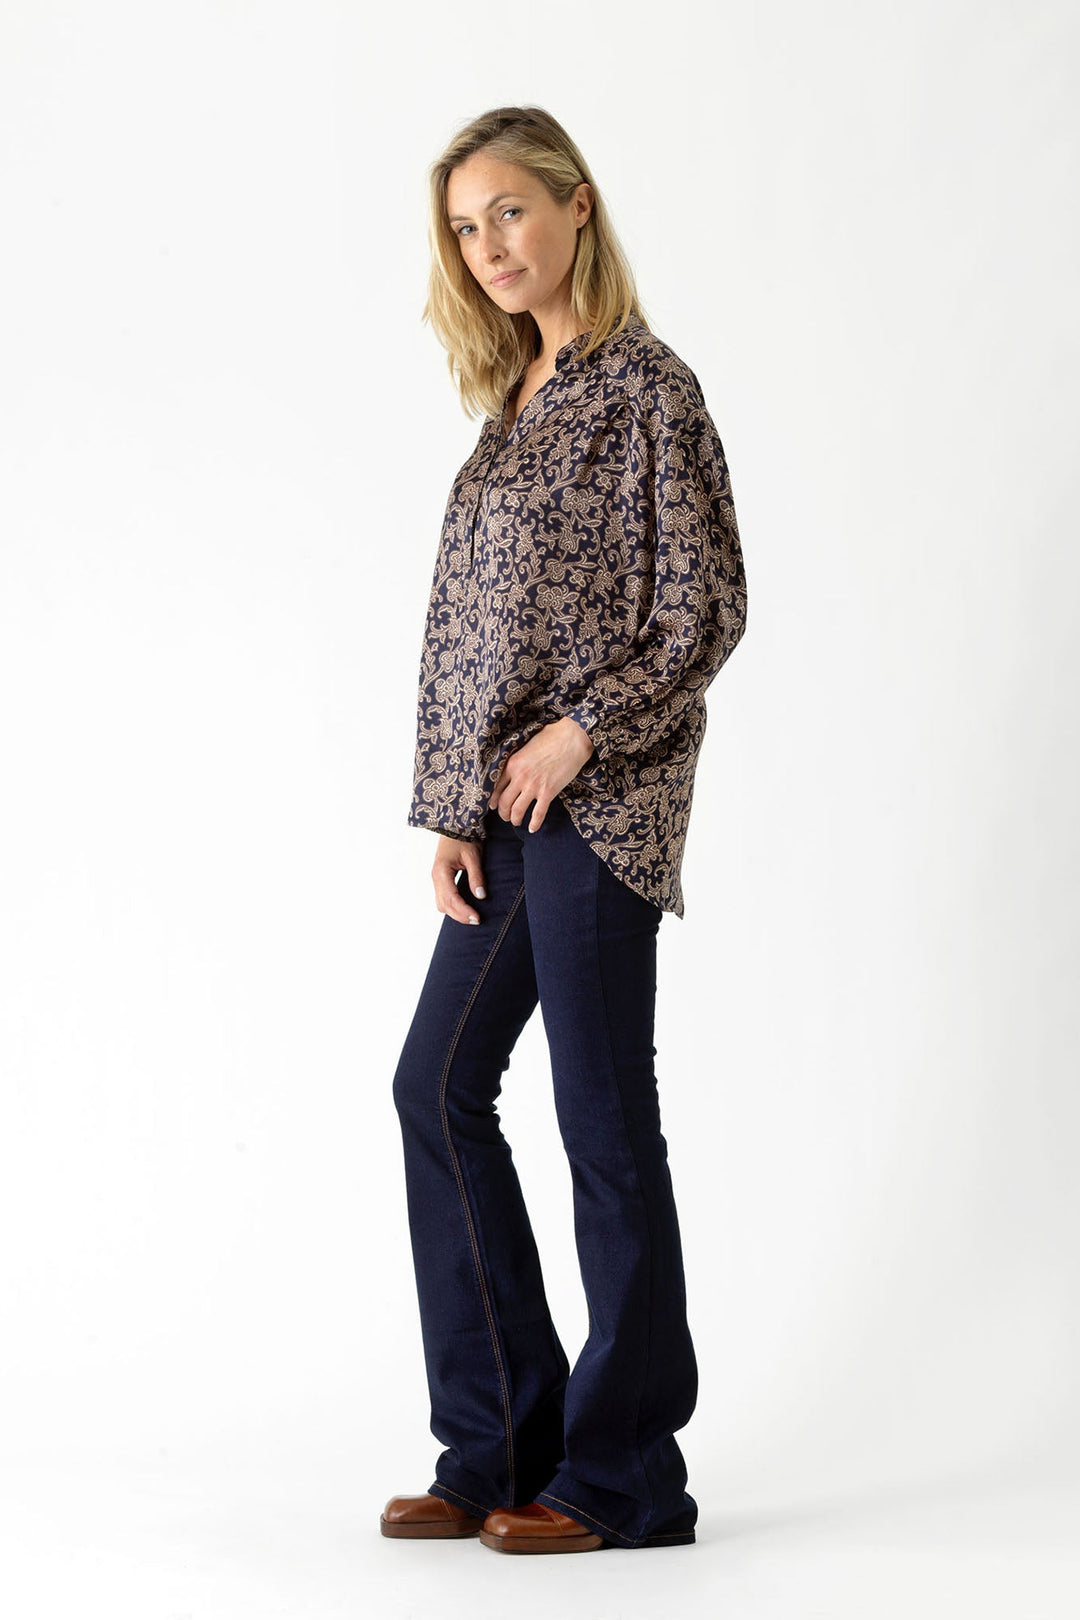 Floral Paisley Blue Darcy Shirt - One Hundred Stars